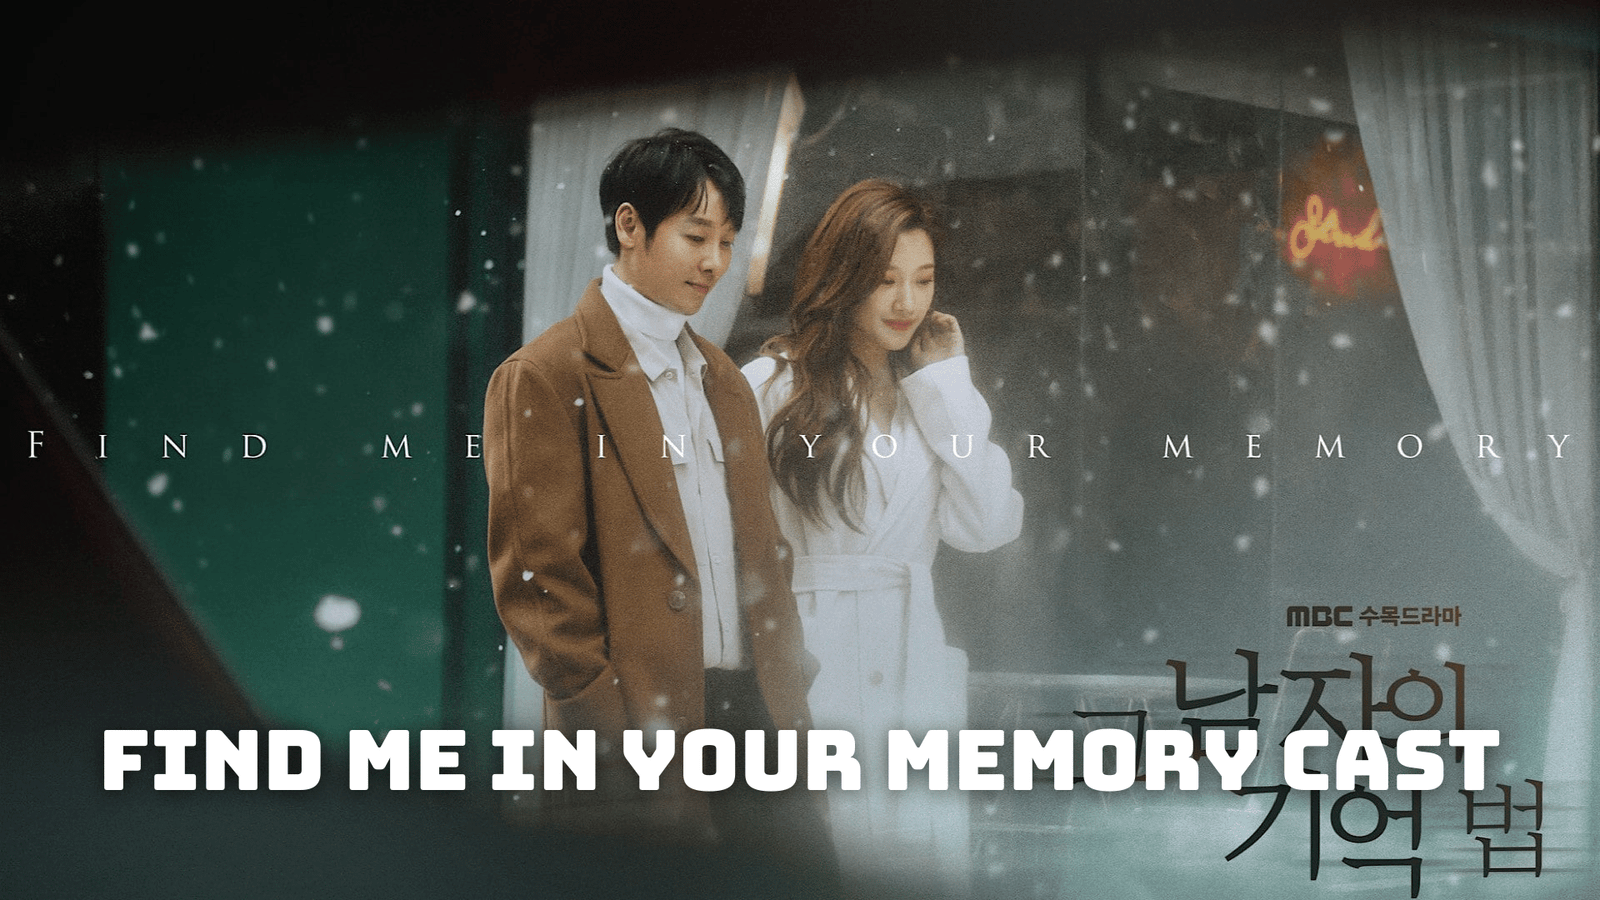 Find Me in Your Memory Cast - Ages, Partners, Characters